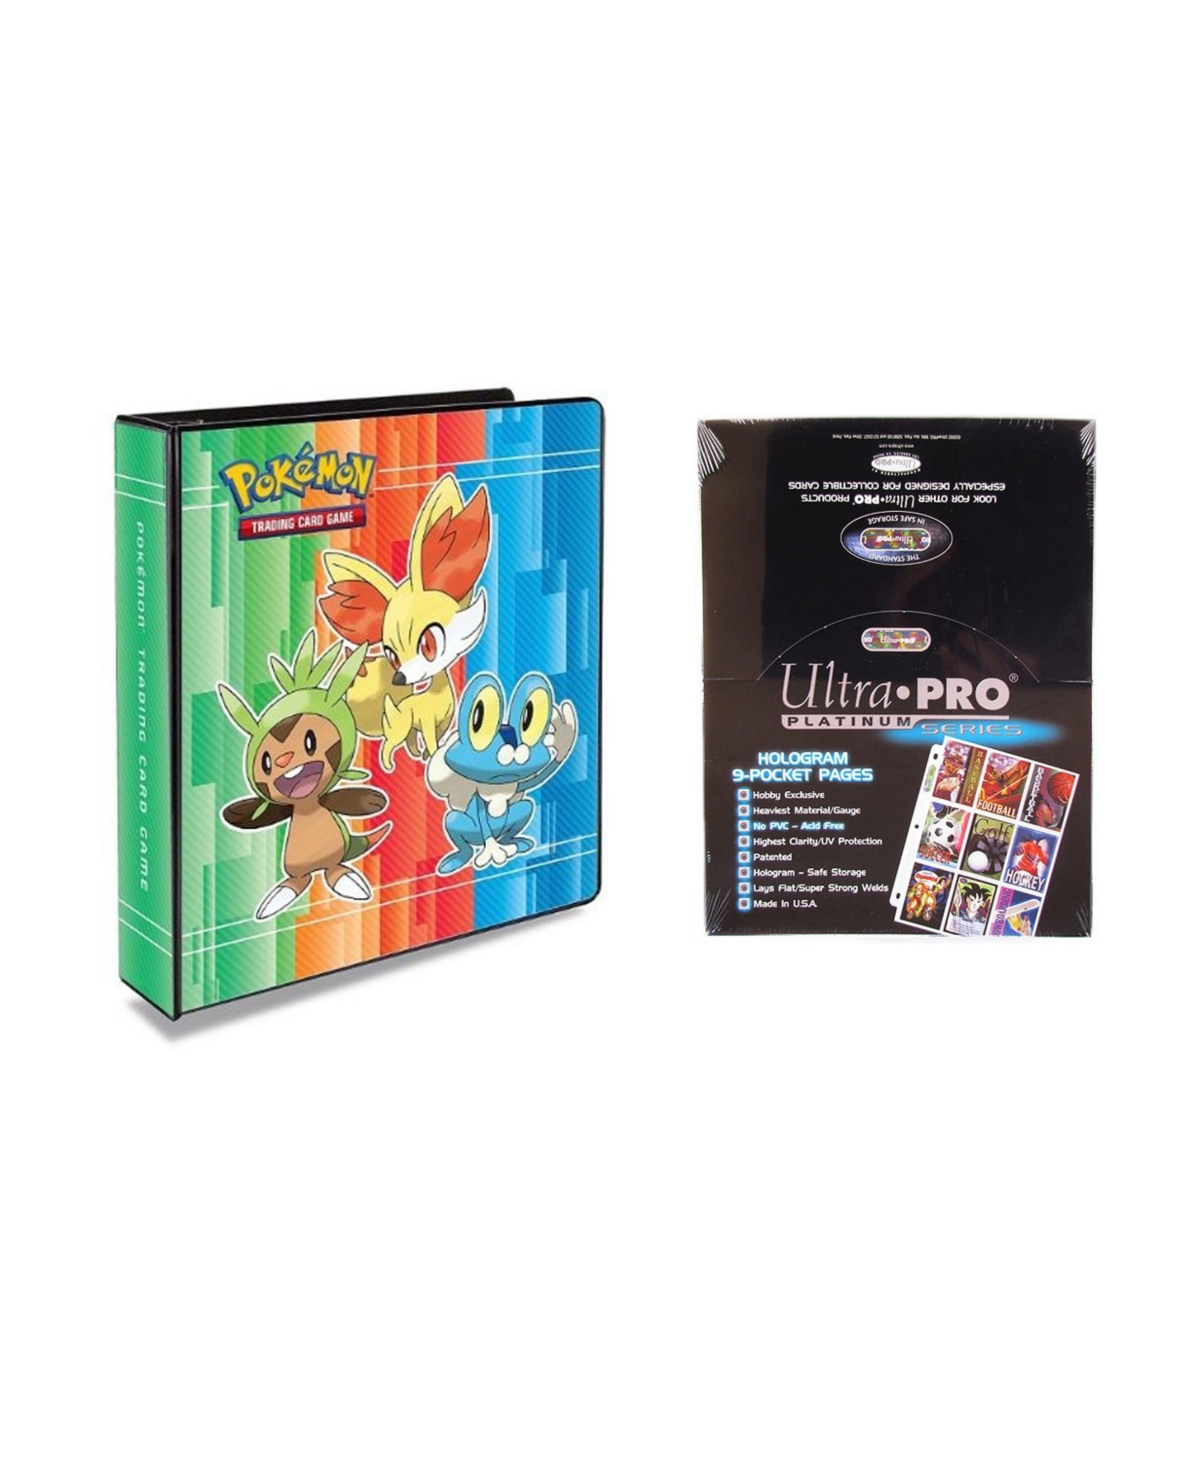 Pokemon X and Y 2", 3 Ring Binder Card Album with 100 Ultra Pro Platinum 9 Pocket Sheets - Multi